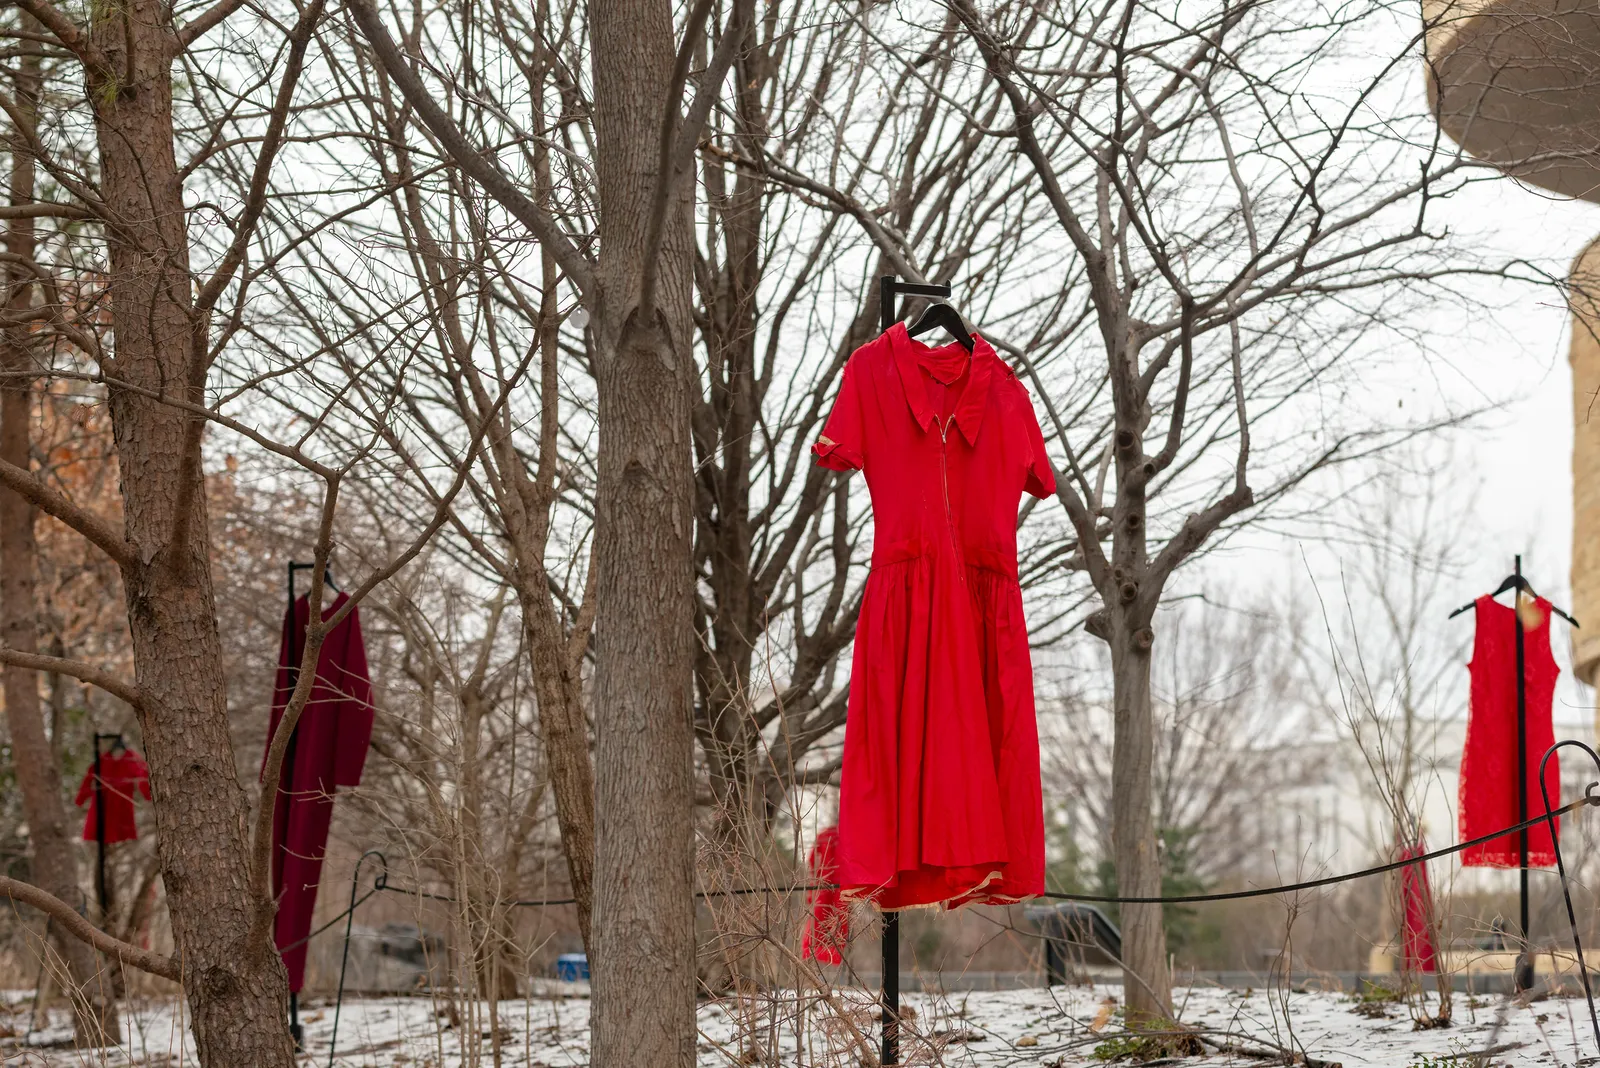 These Haunting Red Dresses Memorialize Murdered and Missing Indigenous Women | the Smithsonian| Smithsonian